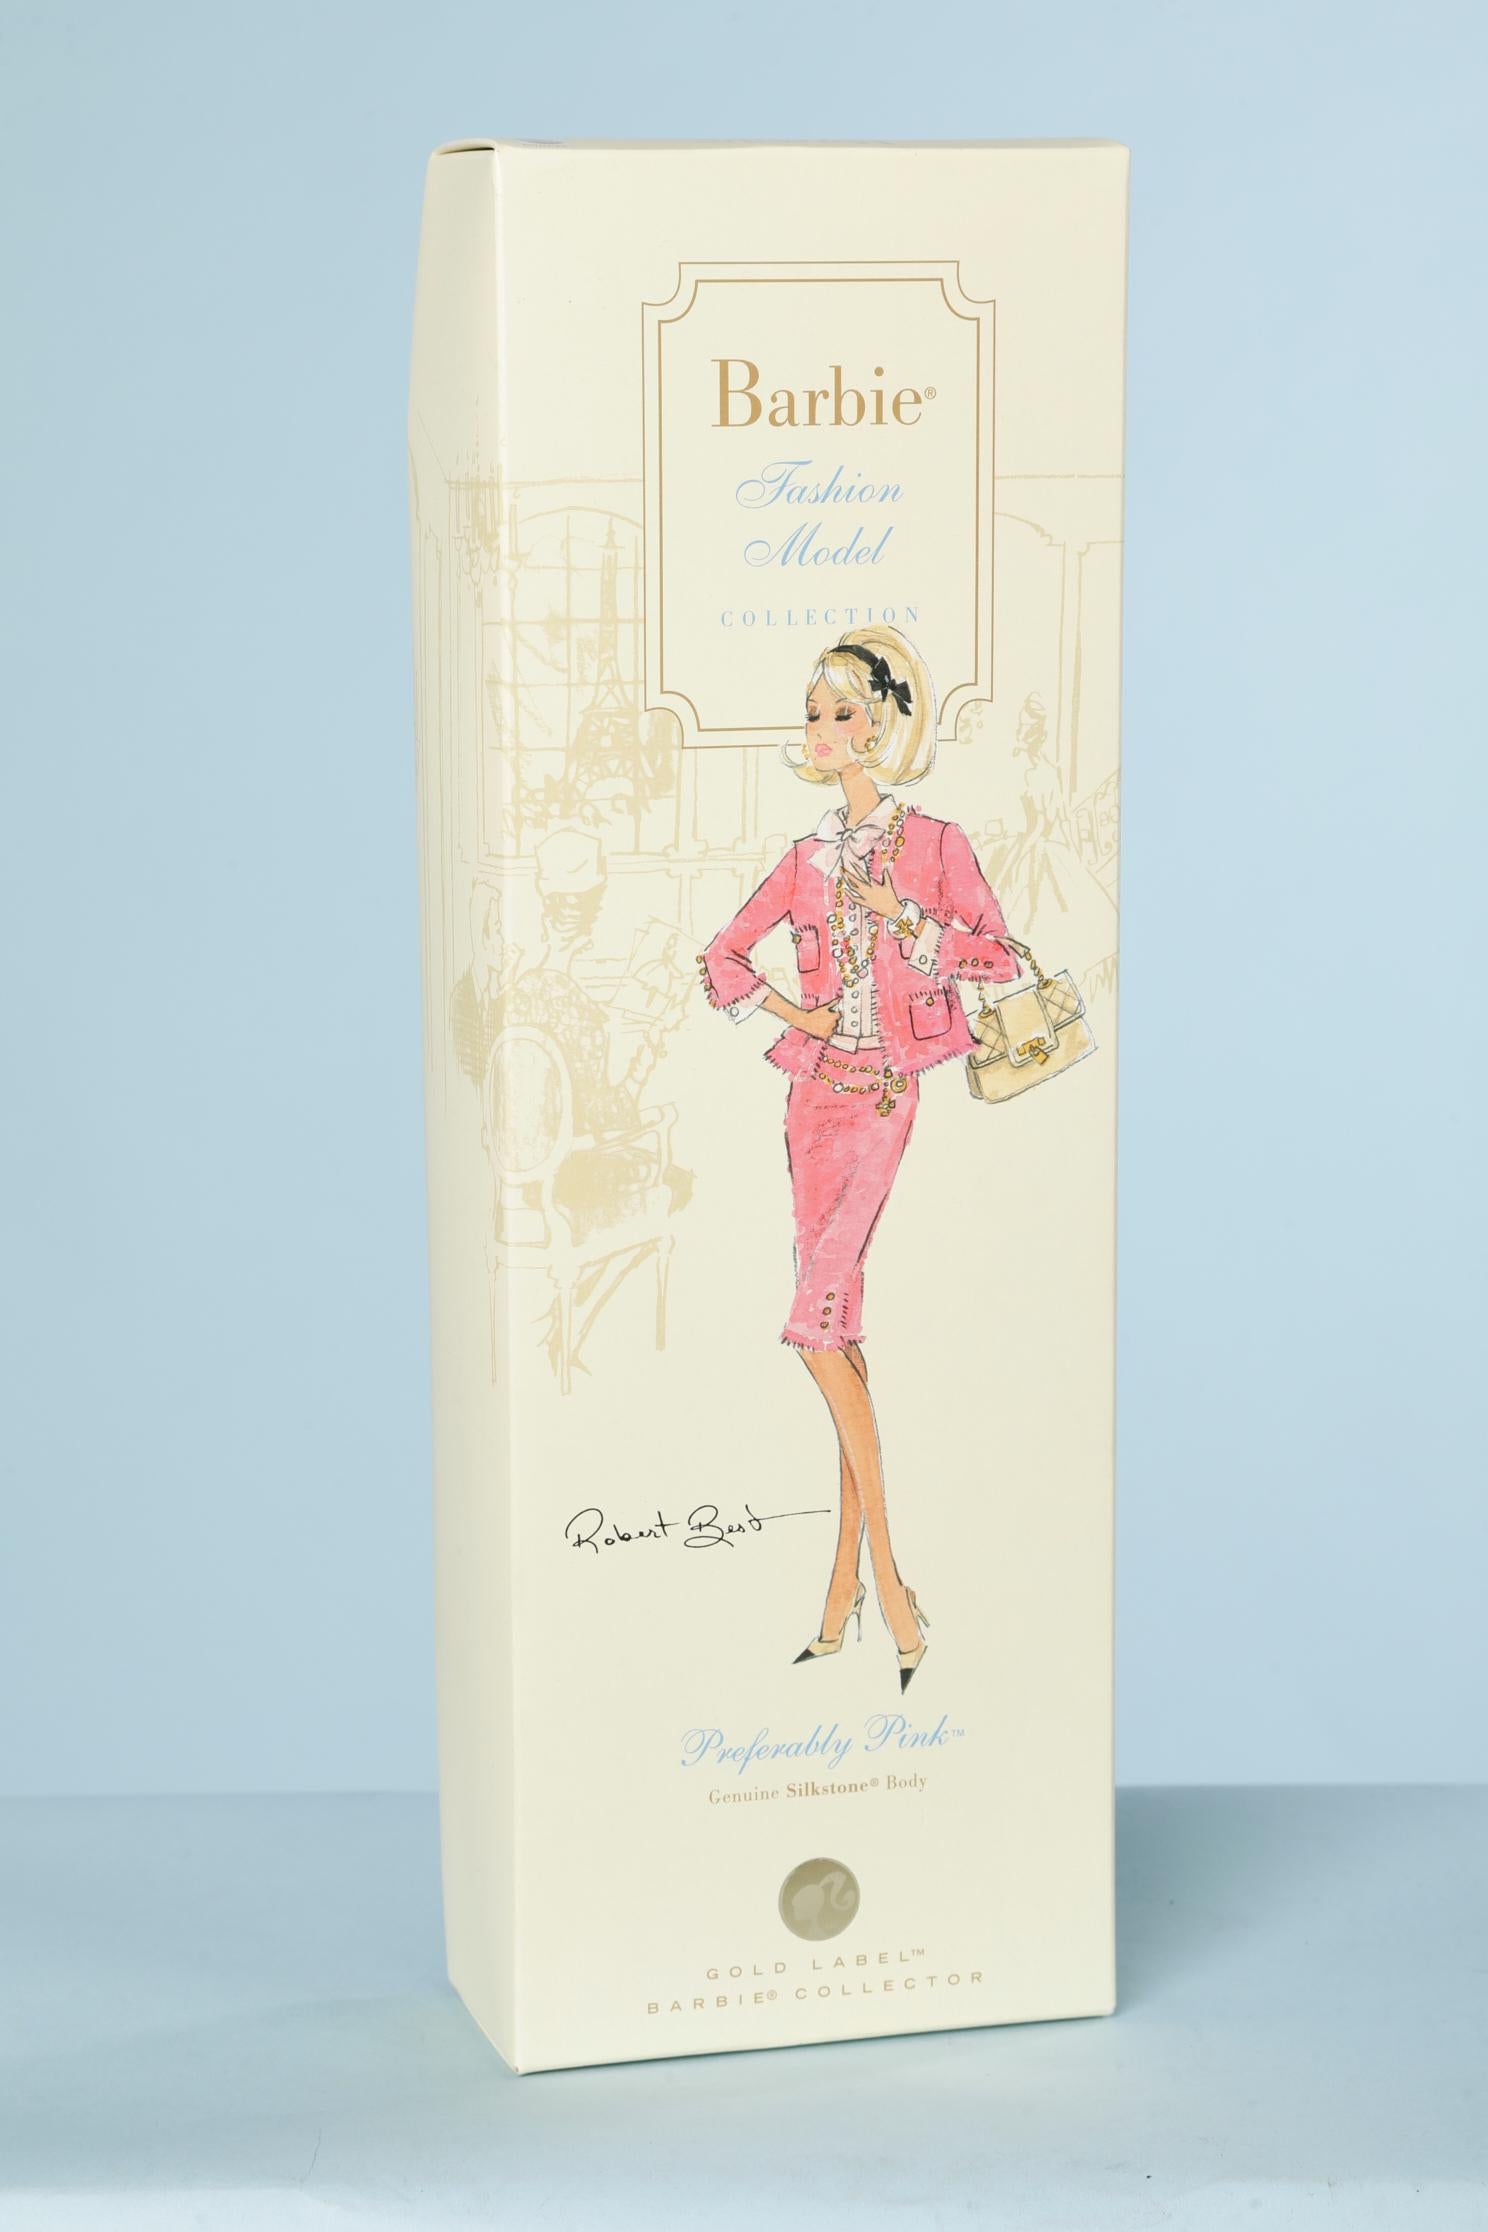 barbie fashion model collection gold label